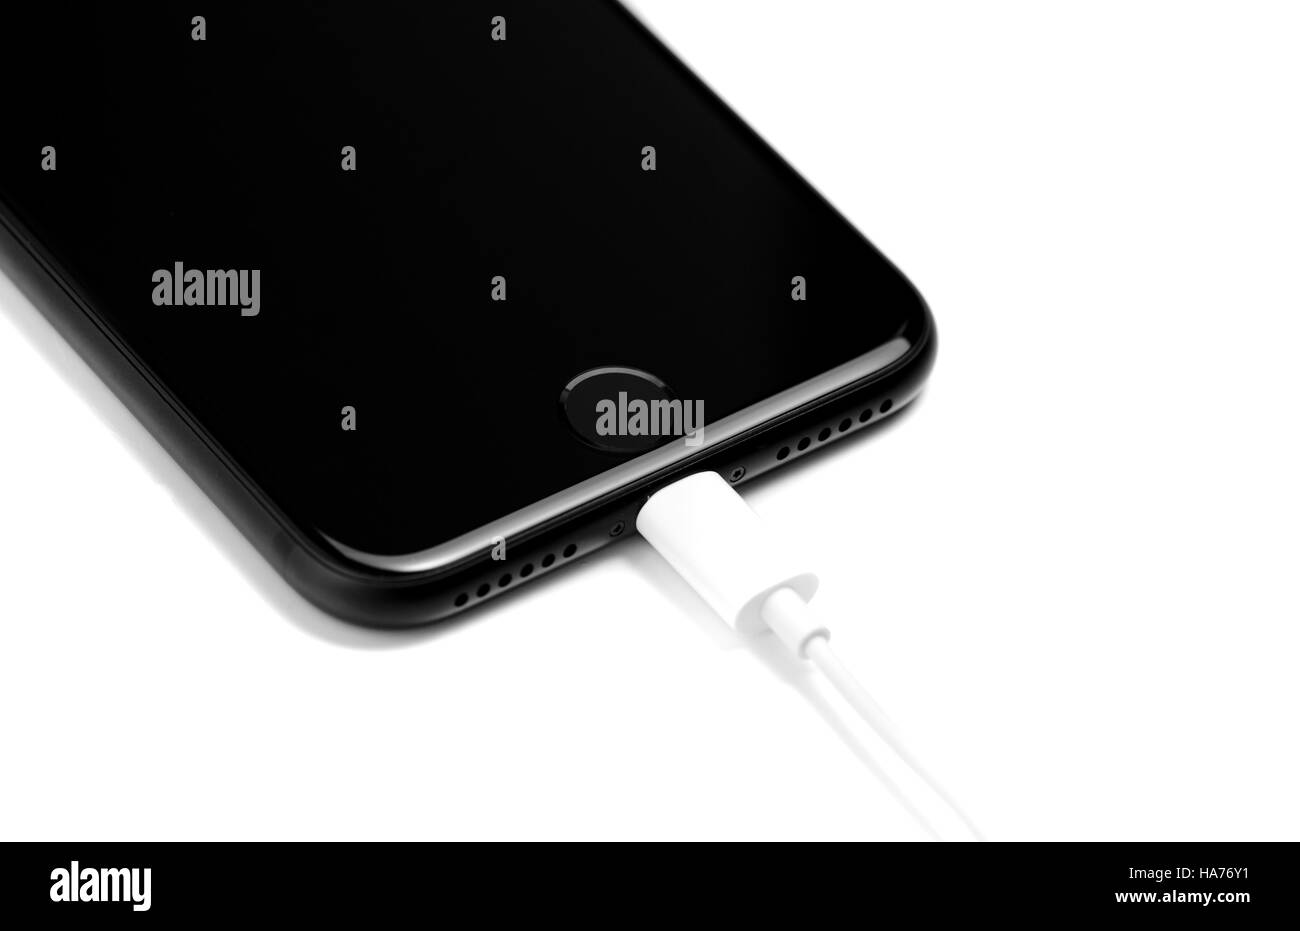 BRASOV, ROMANIA - 25 November 2016: iPhone 7 black matte new Apple product charging; detail of lightning cable and stereo speaker isolated on white Stock Photo